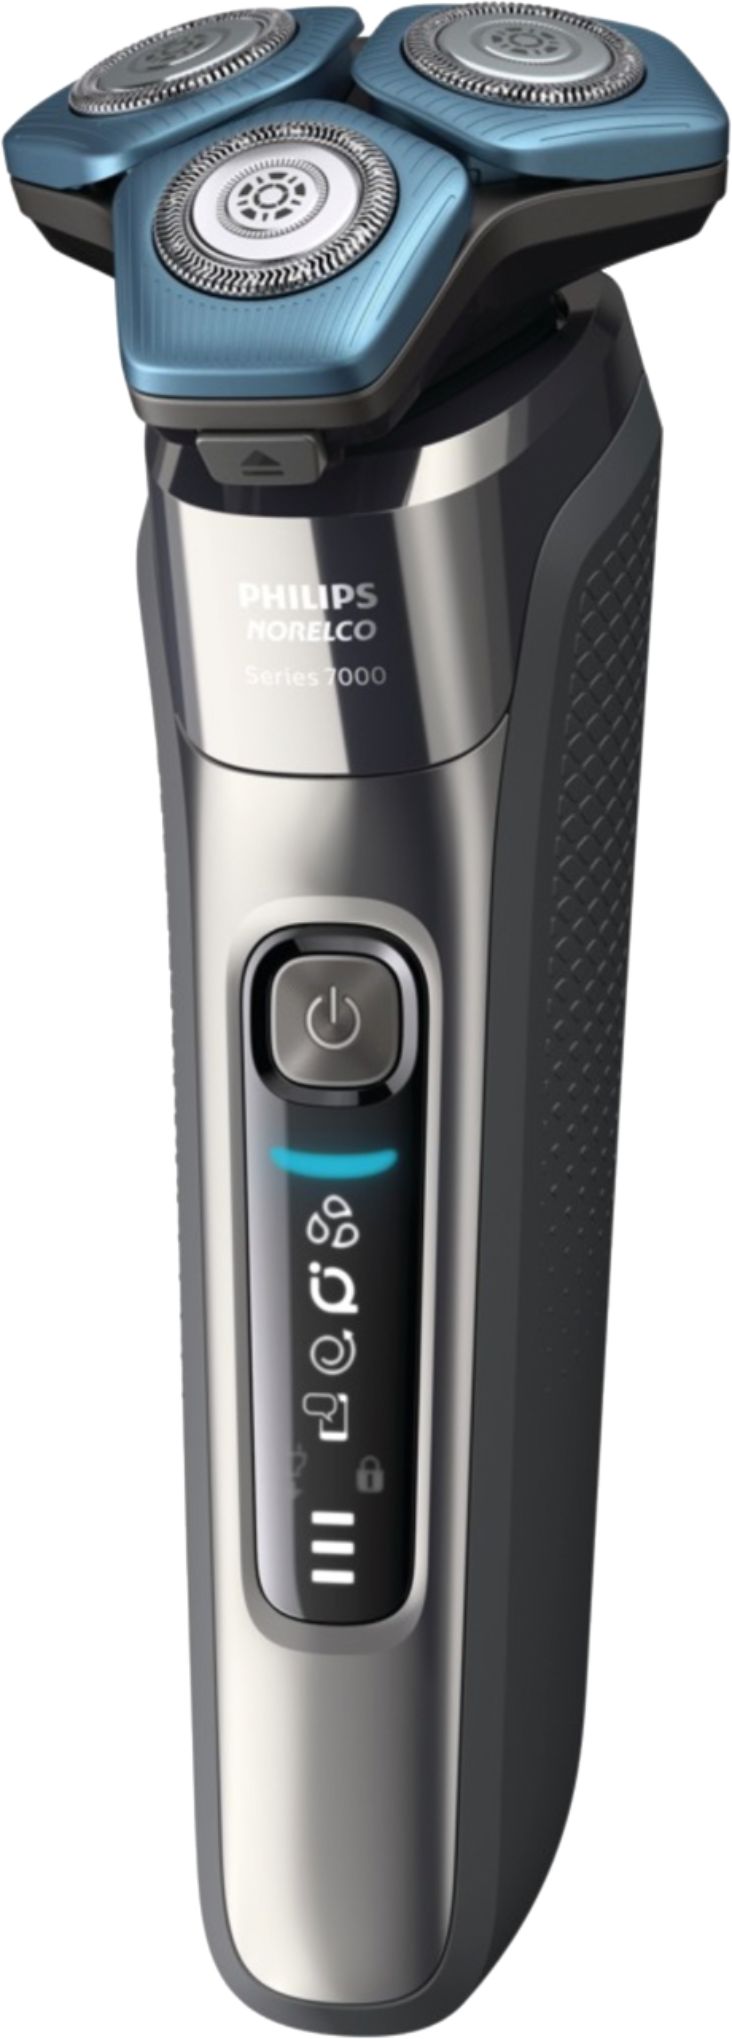 Left View: Barbasol - Rechargeable Wet/Dry Rotary Electric Shaver with Beard Trimmer - Black/Blue